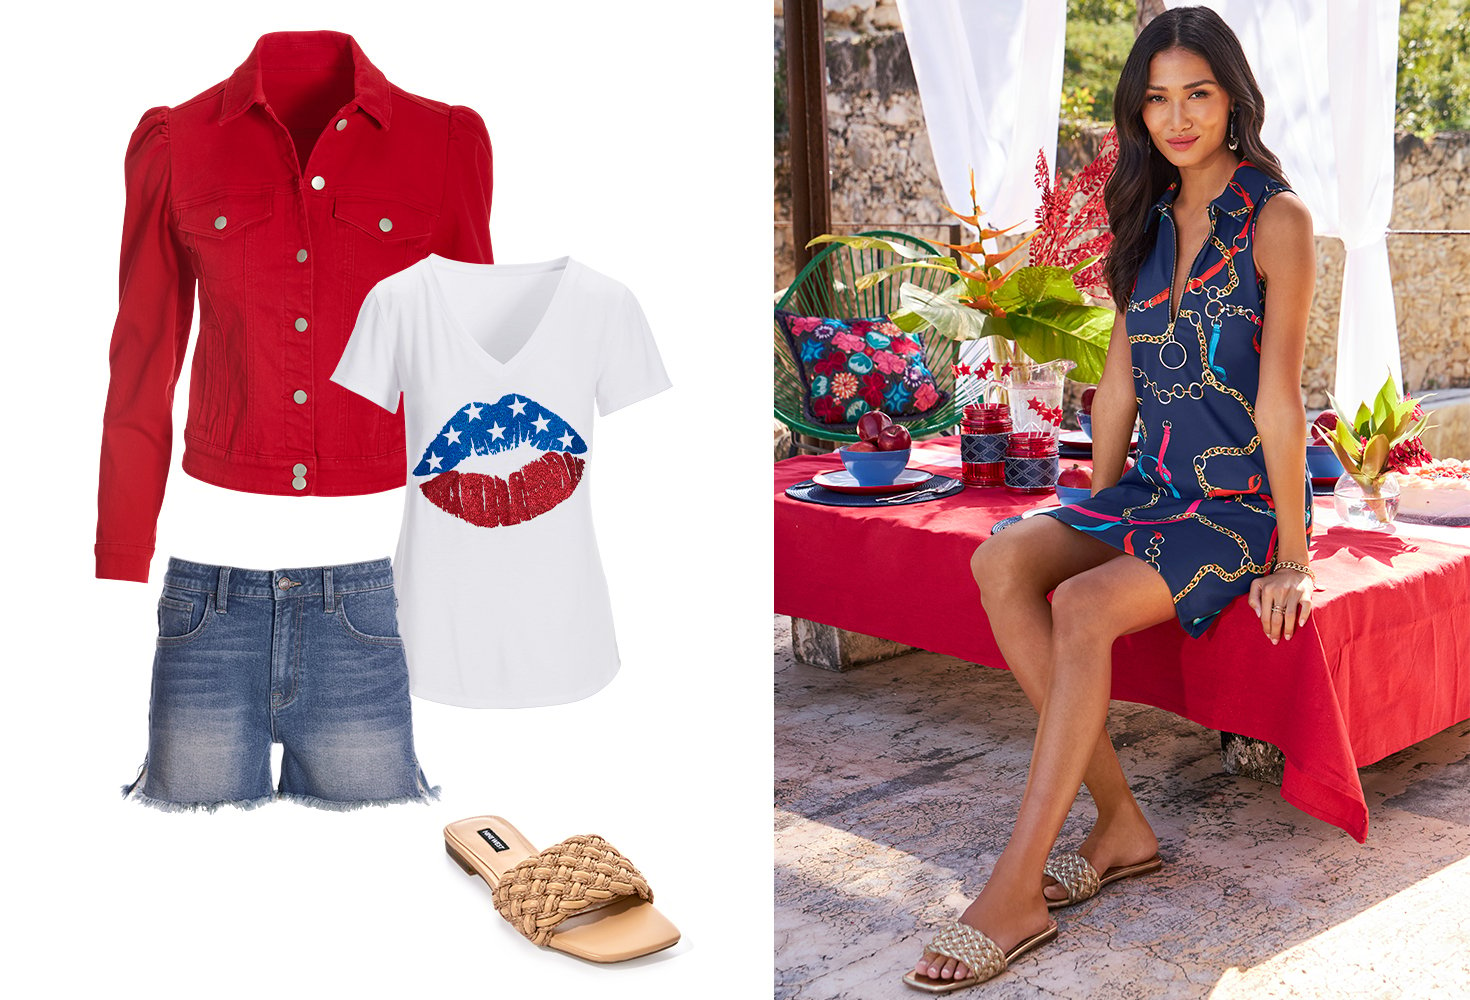 Left panel showing a red puff-sleeve denim jacket, white t-shirt with red, white, and blue lips, denim shorts, and tan slides. Right model wearing a red, white, and blue chain print collared sleeveless dress and gold braided slides.